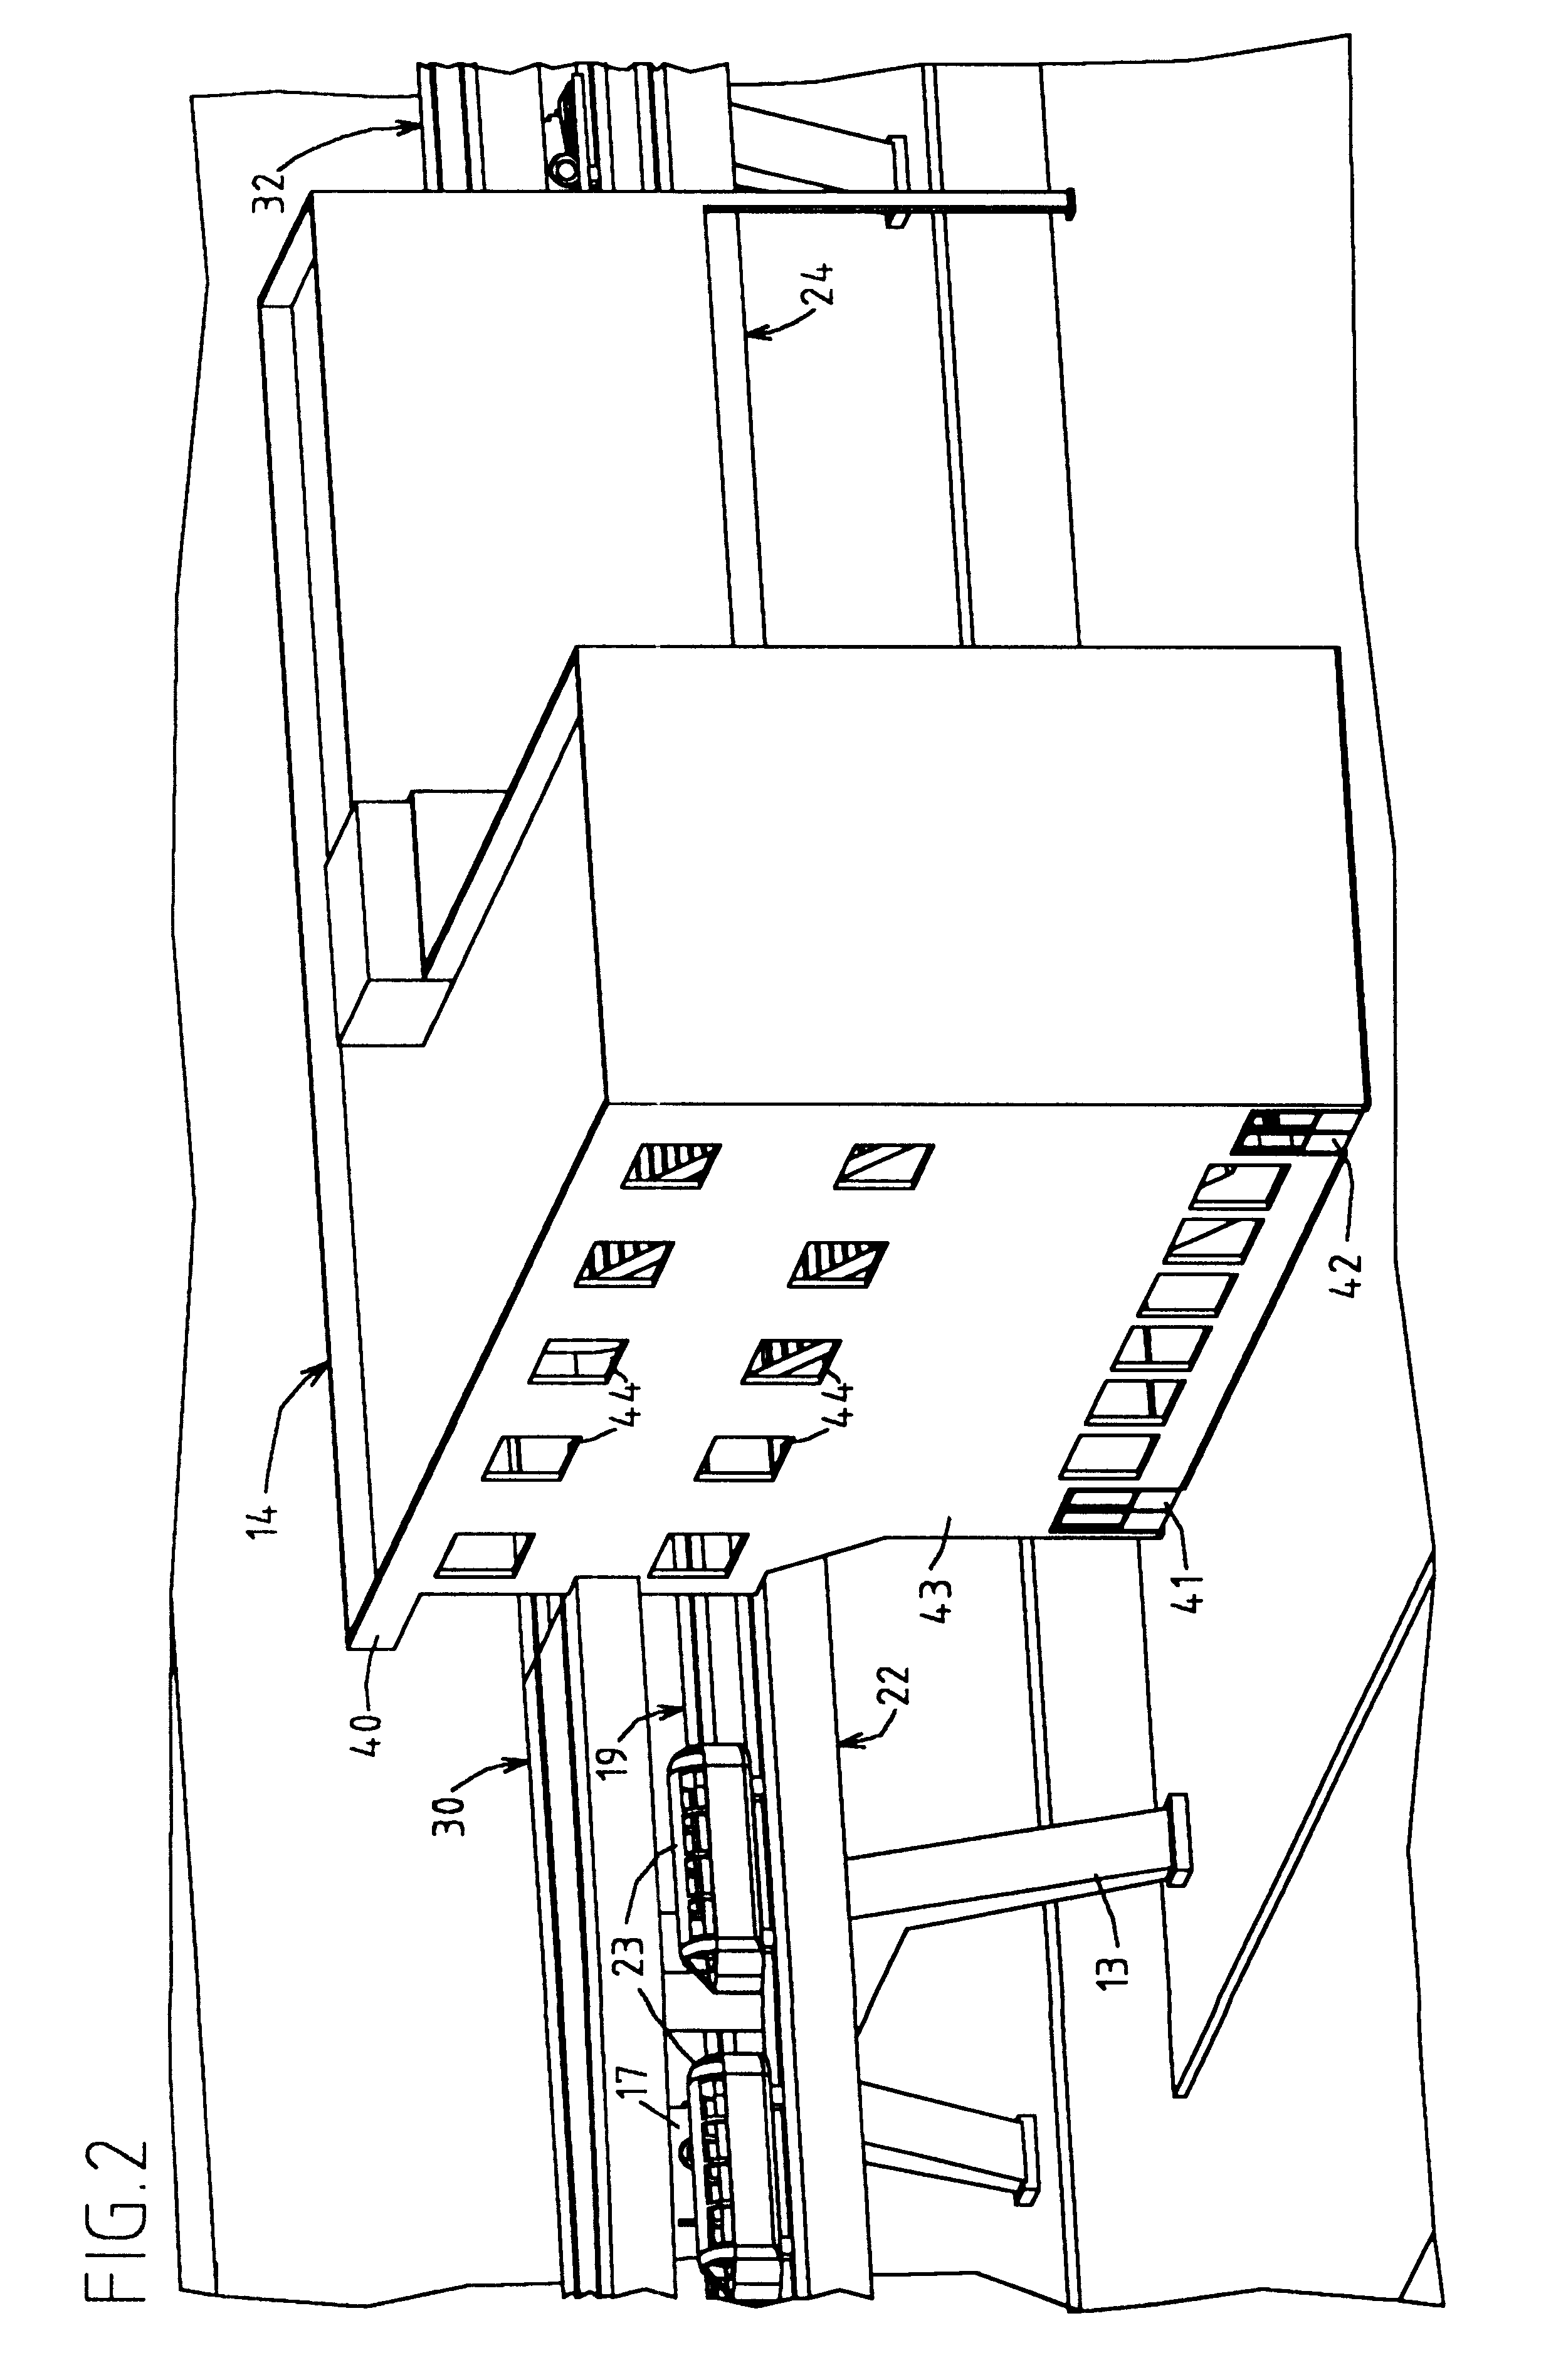 System for automated transport of passenger cabins, automobile platforms and other load-carriers